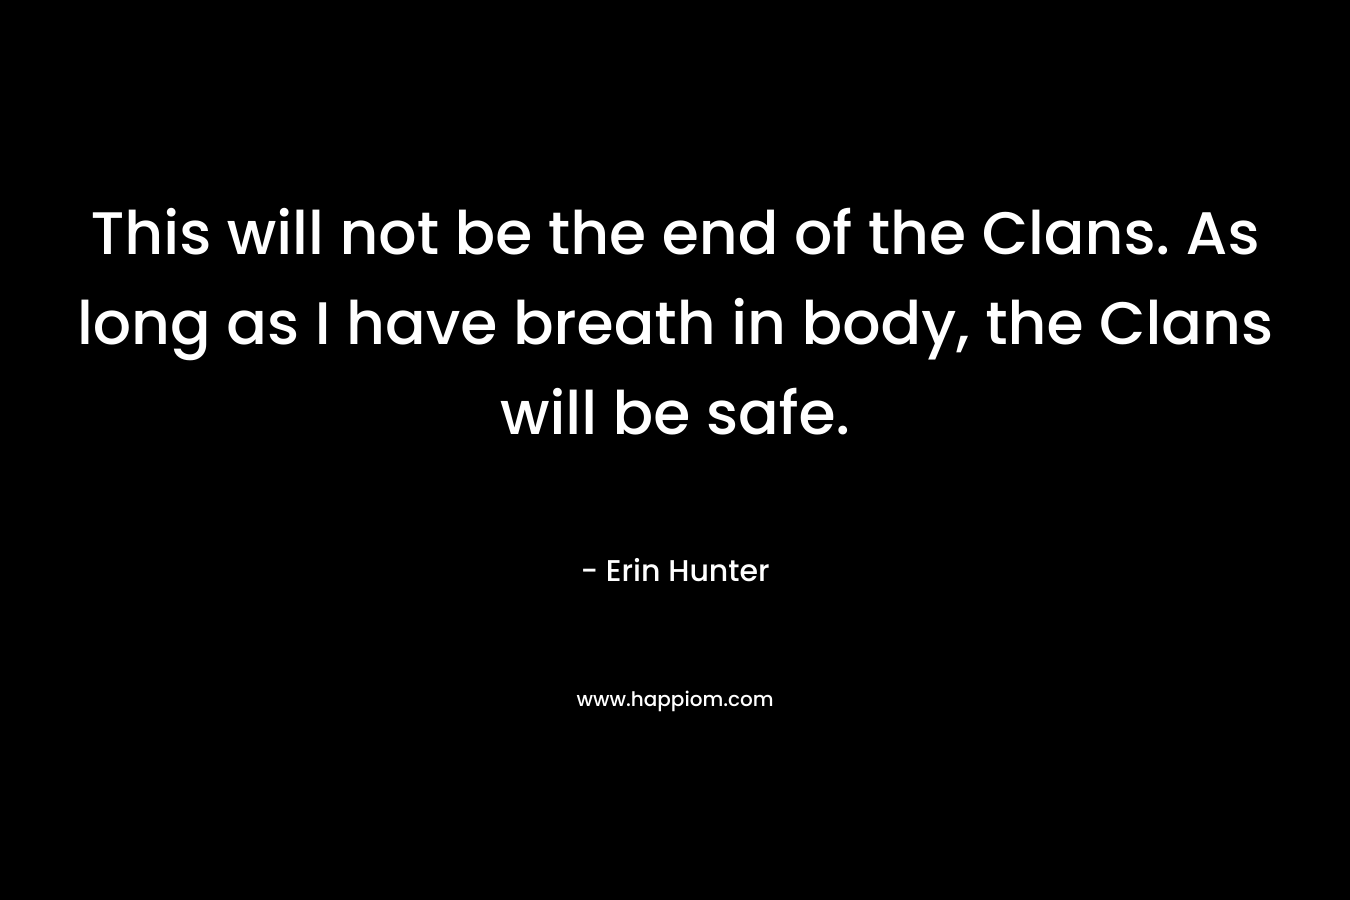 This will not be the end of the Clans. As long as I have breath in body, the Clans will be safe. – Erin Hunter